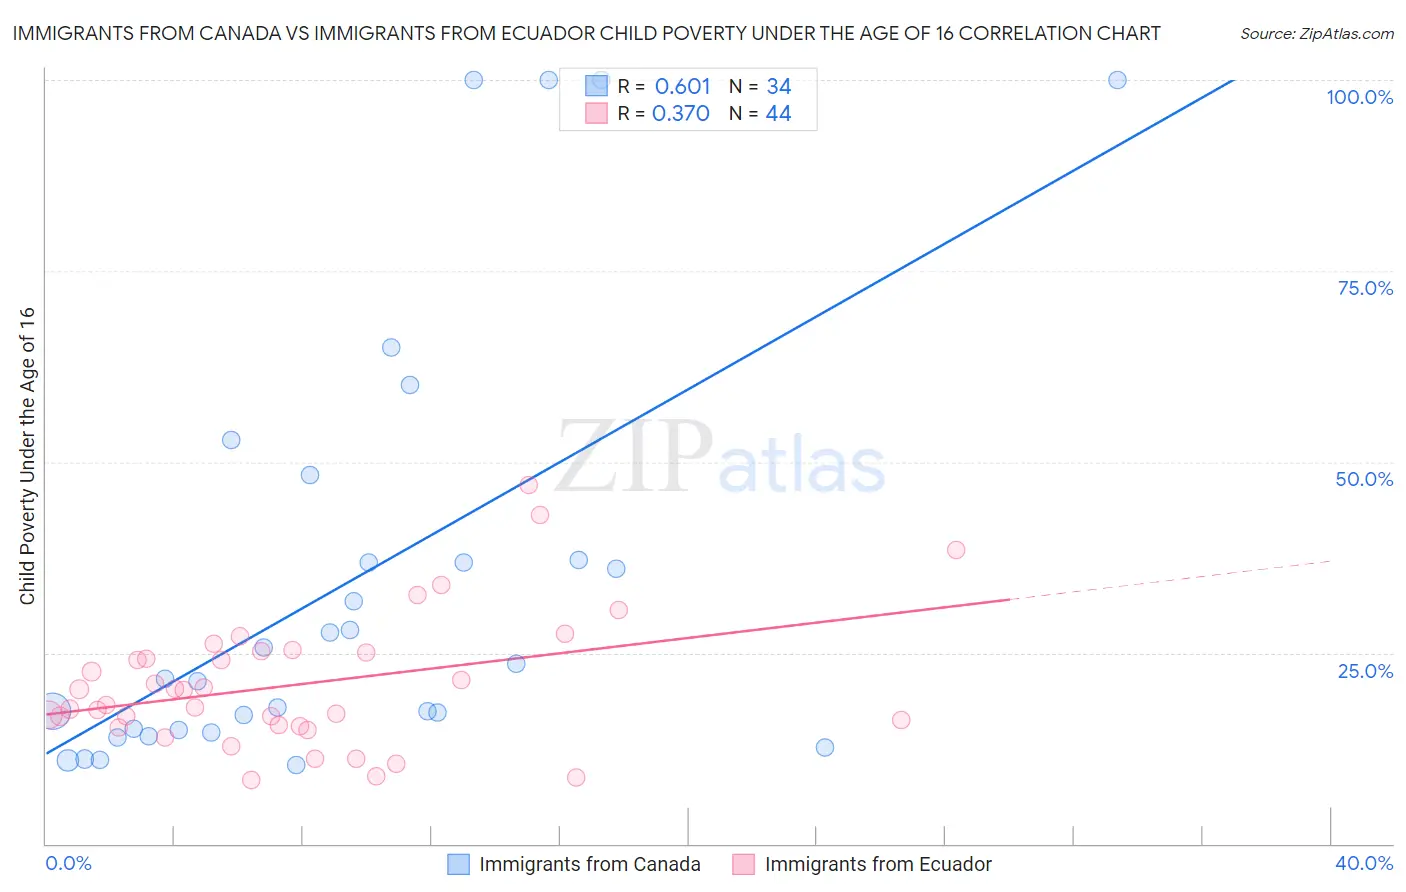 Immigrants from Canada vs Immigrants from Ecuador Child Poverty Under the Age of 16